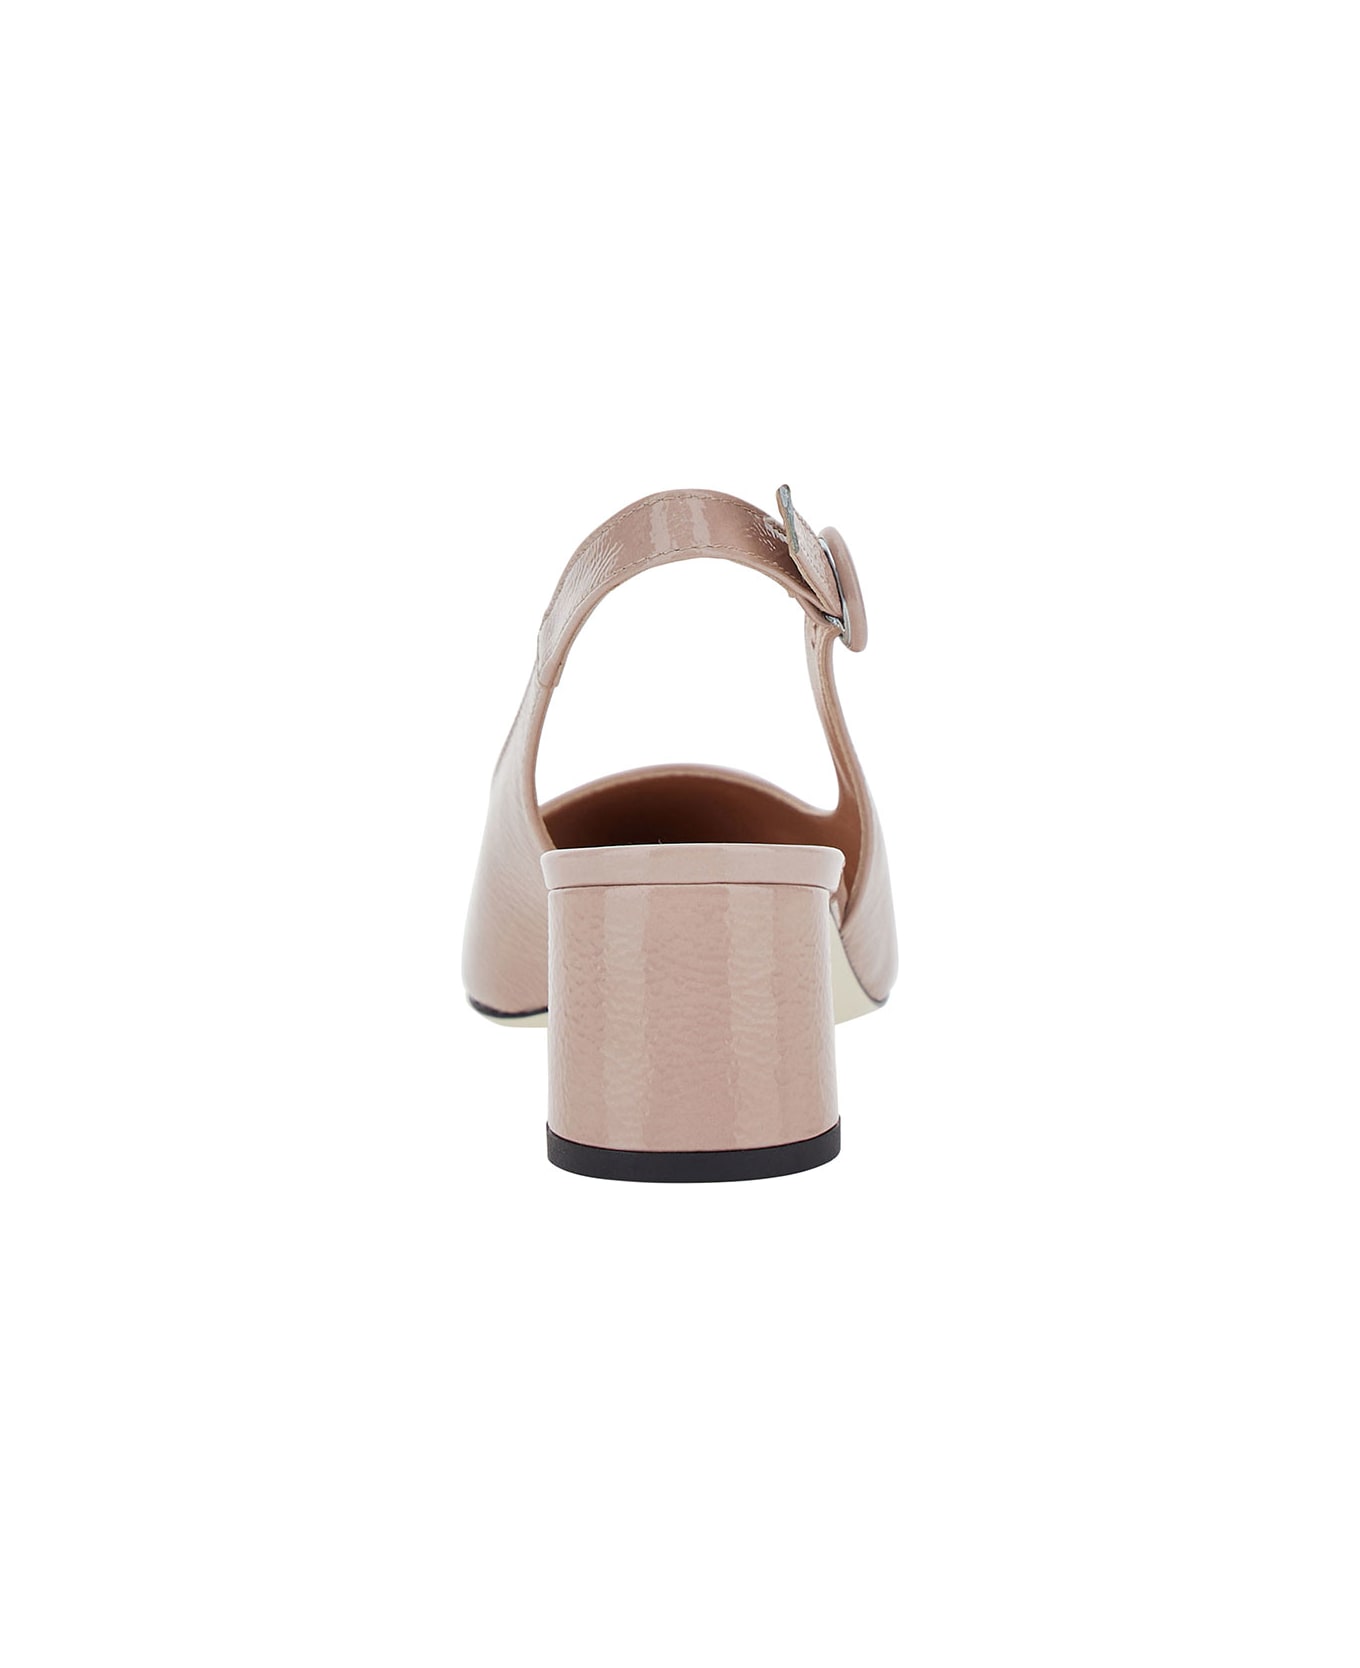 Pollini Pink Slingback Pumps With Block Heel In Leather Woman - Pink ハイヒール